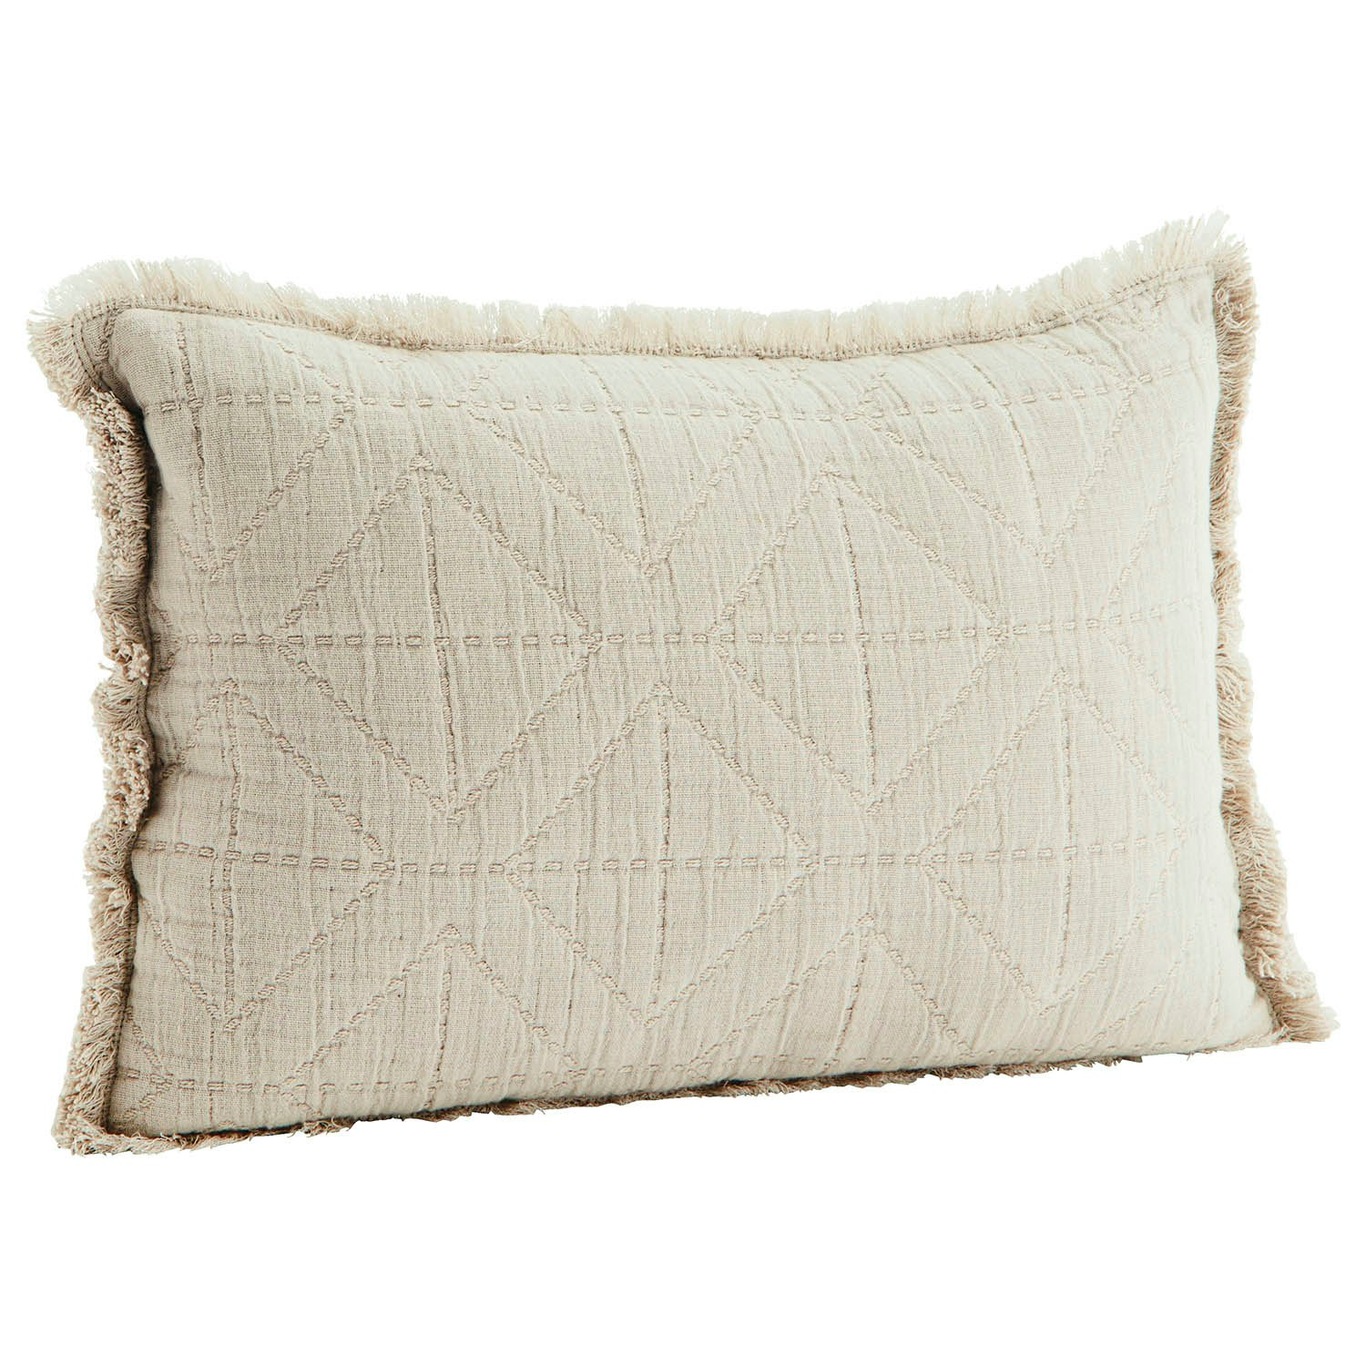 Embroidered Cushion Cover 30x45 cm, Light Taupe